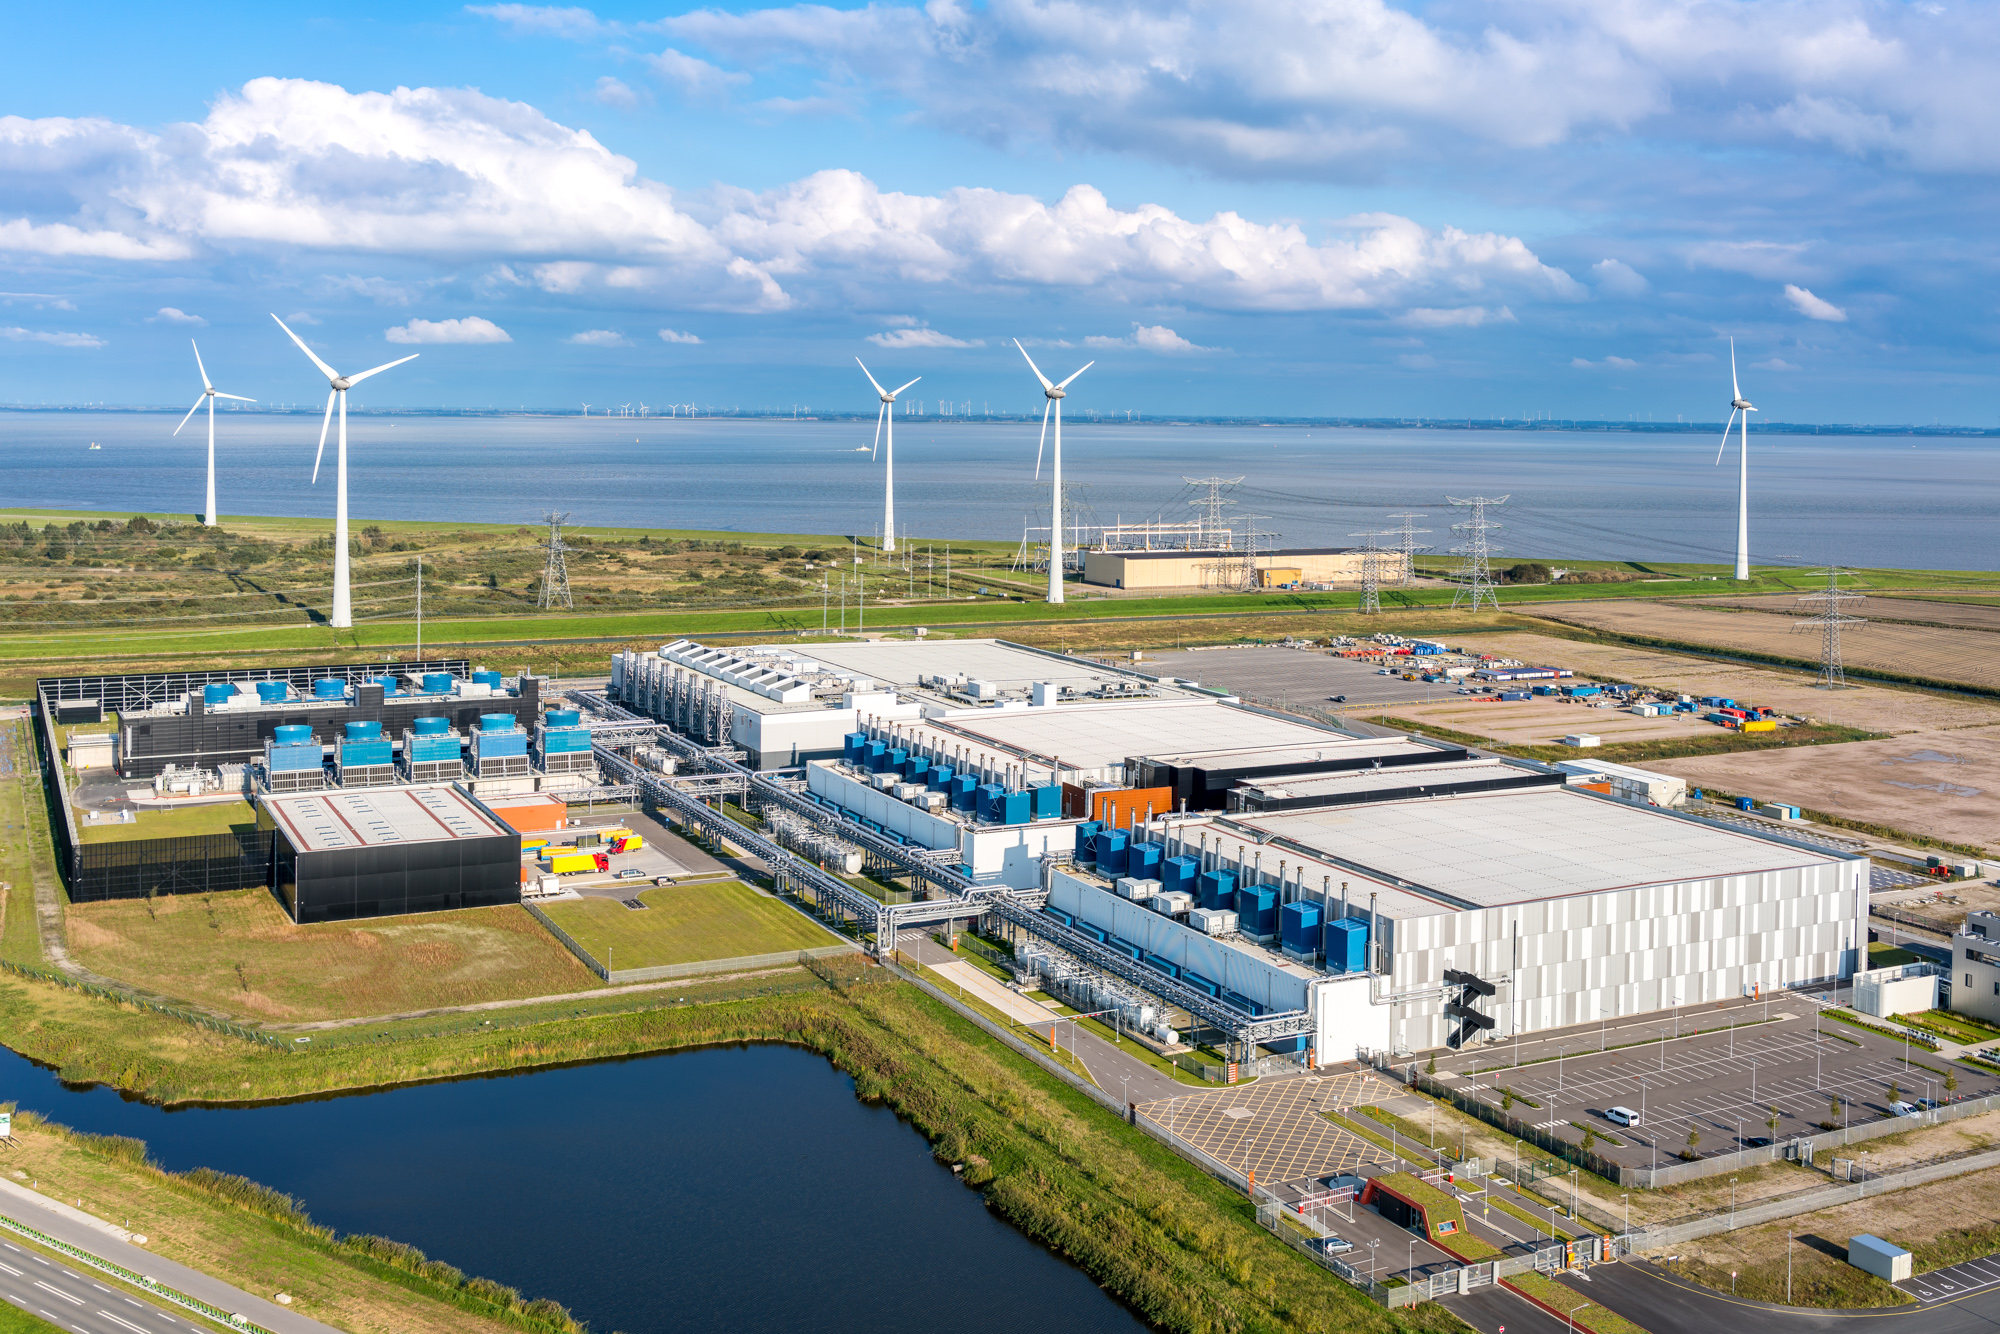 Aerial view of a data center with windmills in the background